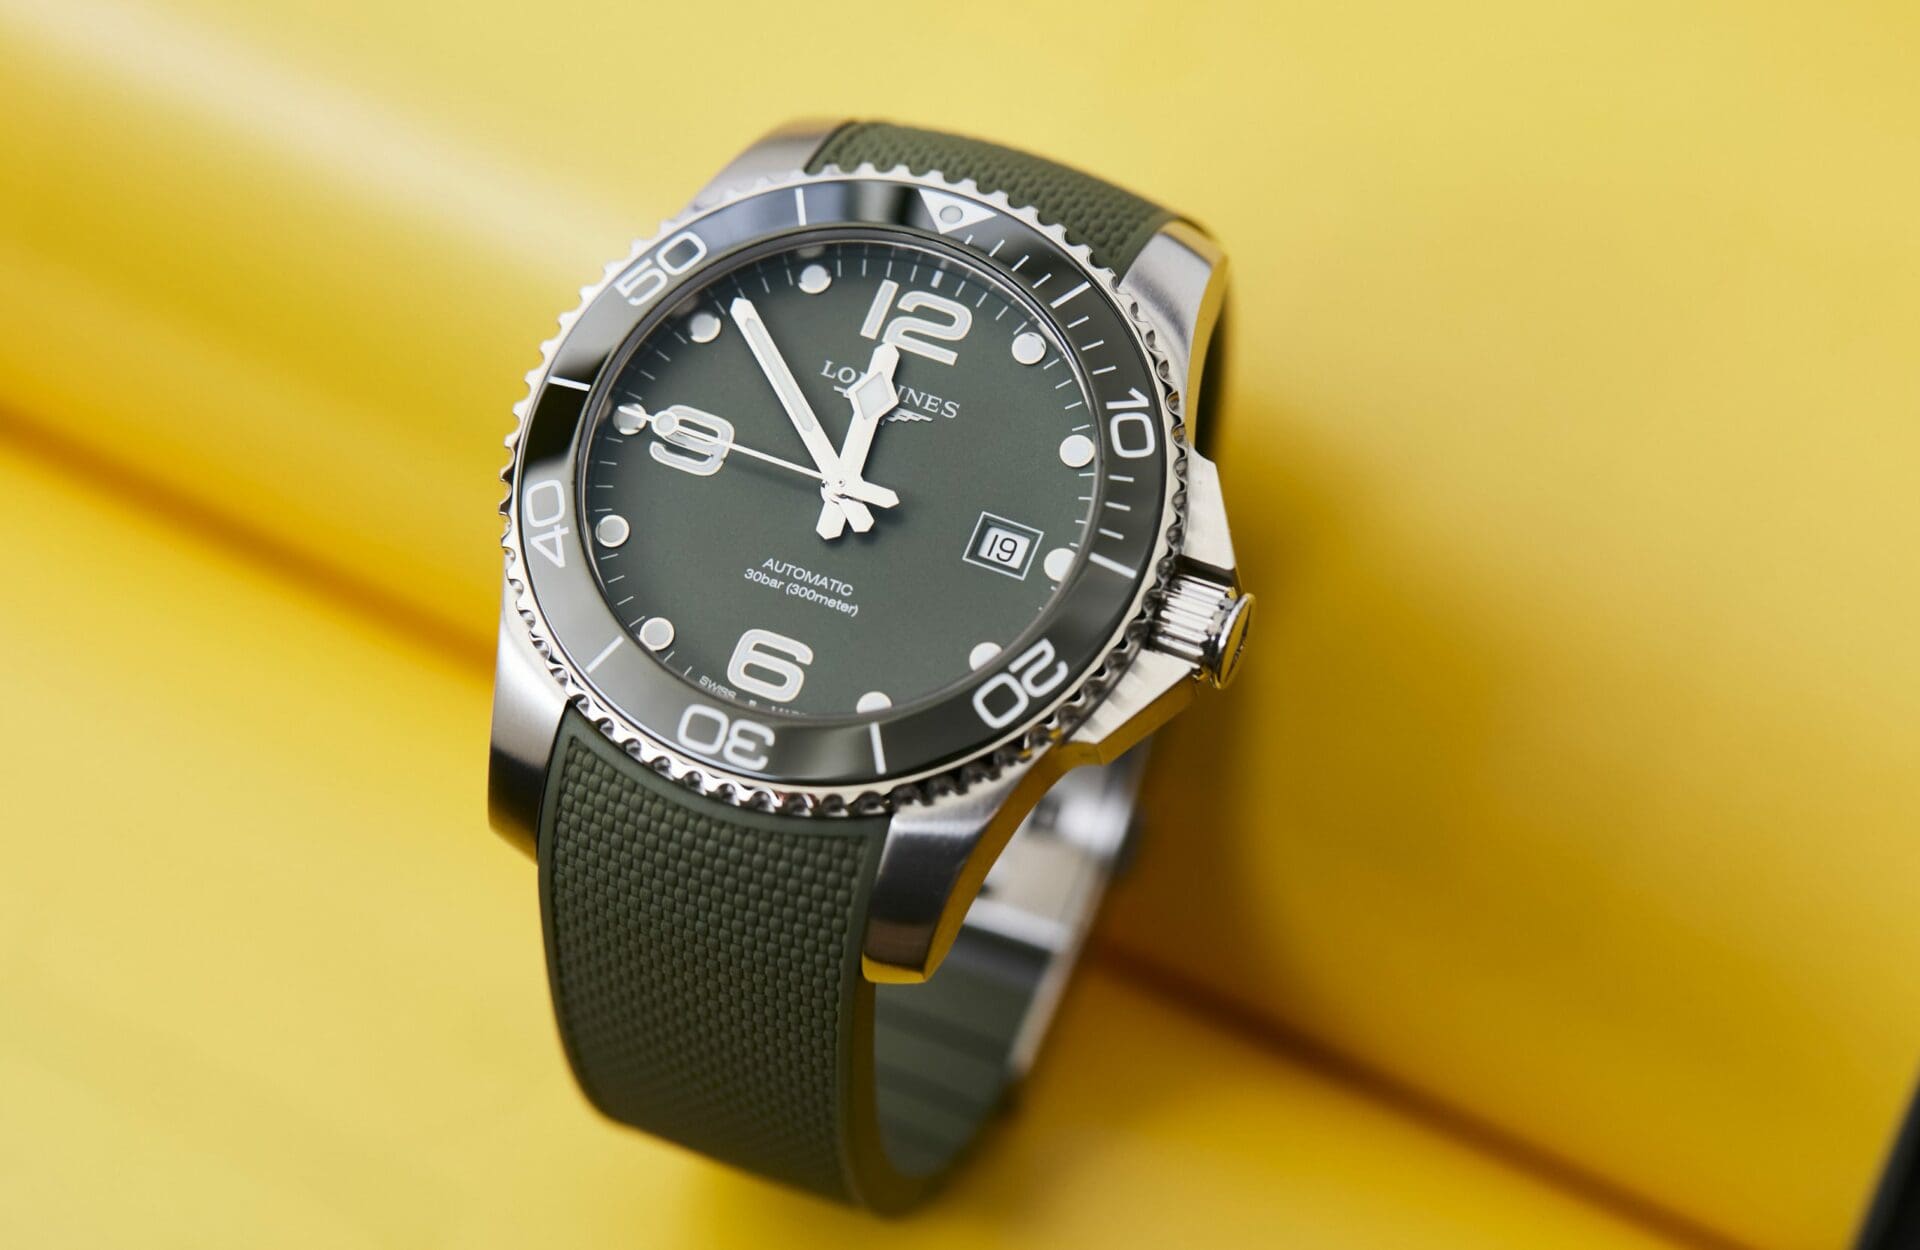 IN-DEPTH: The Longines HydroConquest 41mm in Khaki Green, a value proposition like few others